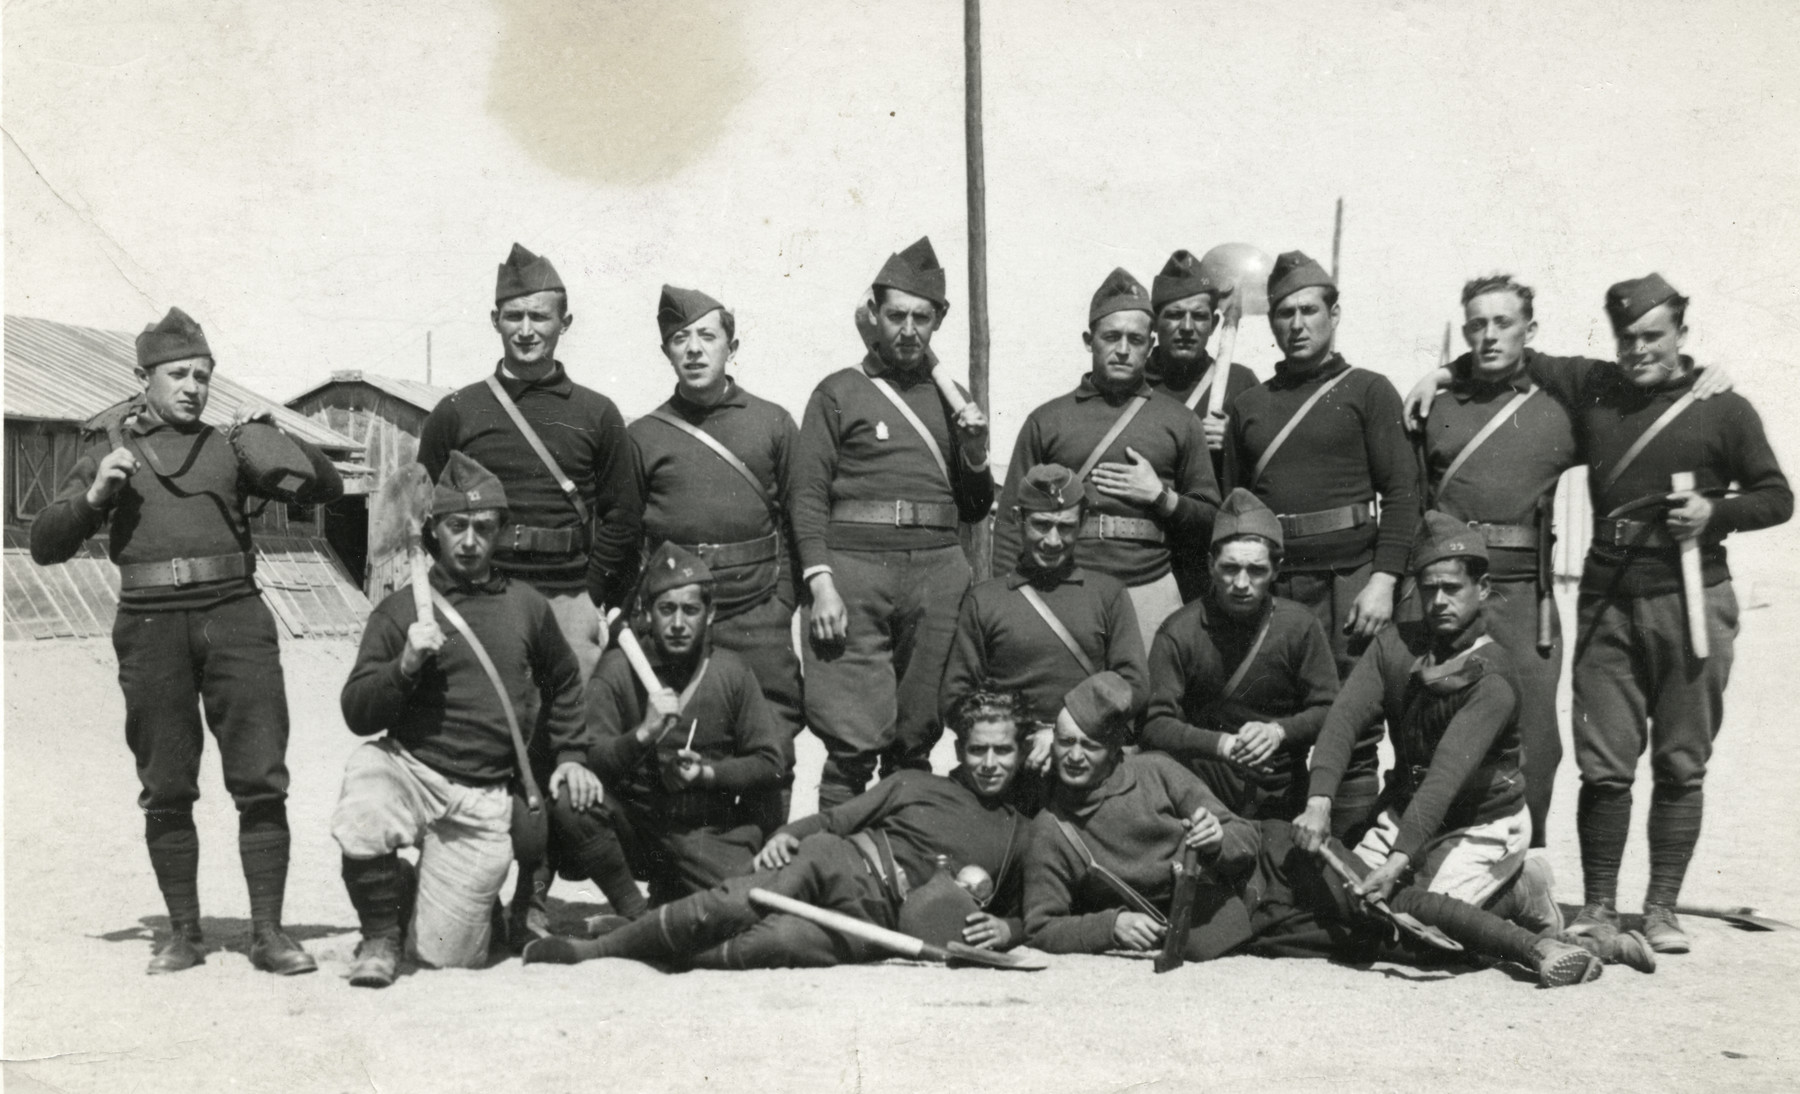 Group portrait of members of the Engage Volontaires, foreign-born Jews in a French paramilitary unit, carrying shovels.

Mendel Max Rosensweig is pictured on the bottom left.